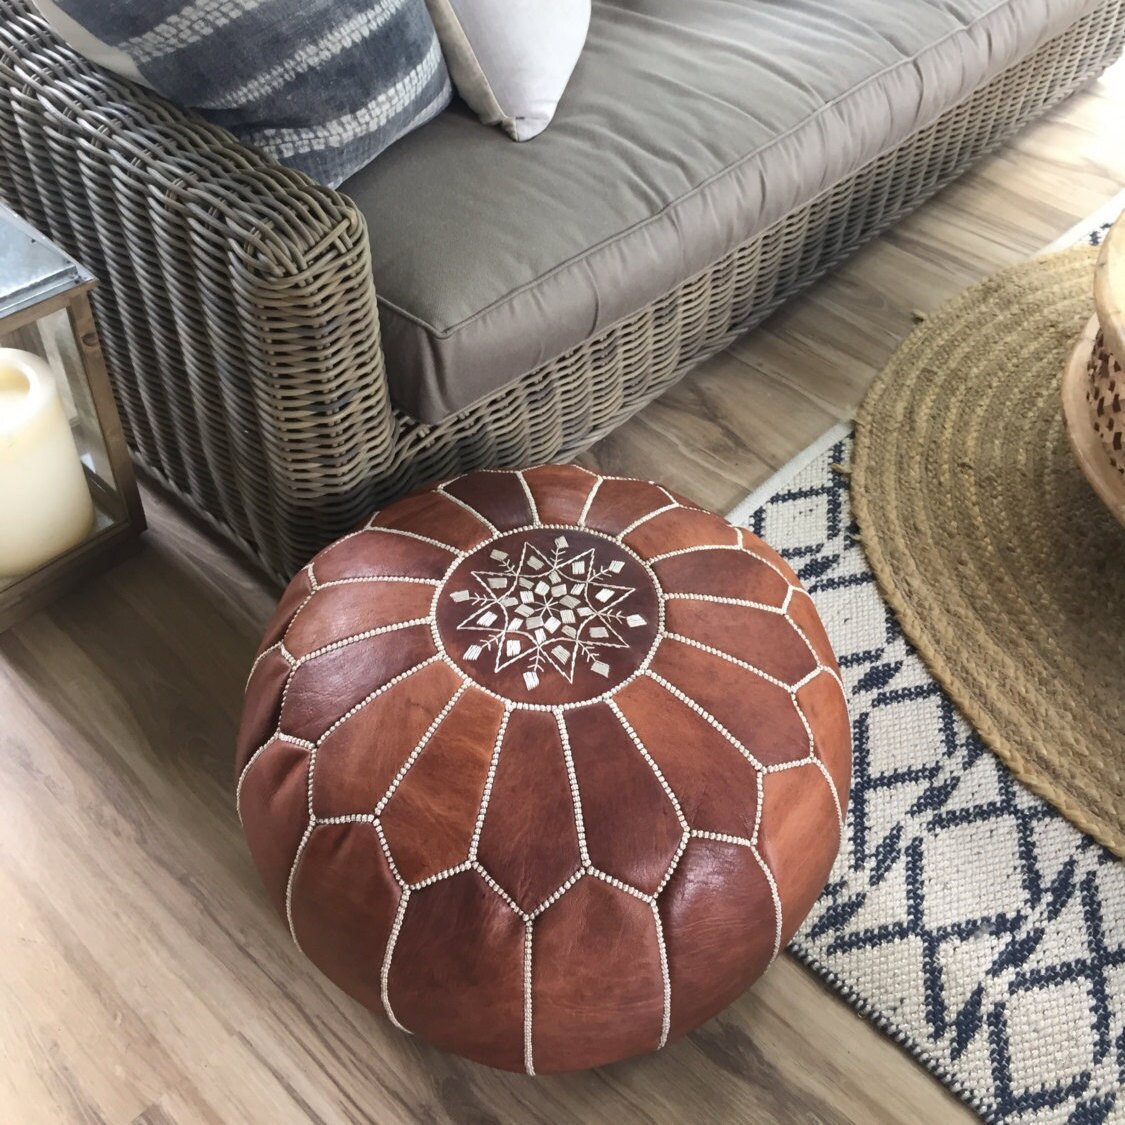 SALE STUFFED Moroccan Leather Pouf Ottoman With Top Embroidery in Dark Tan  and White 